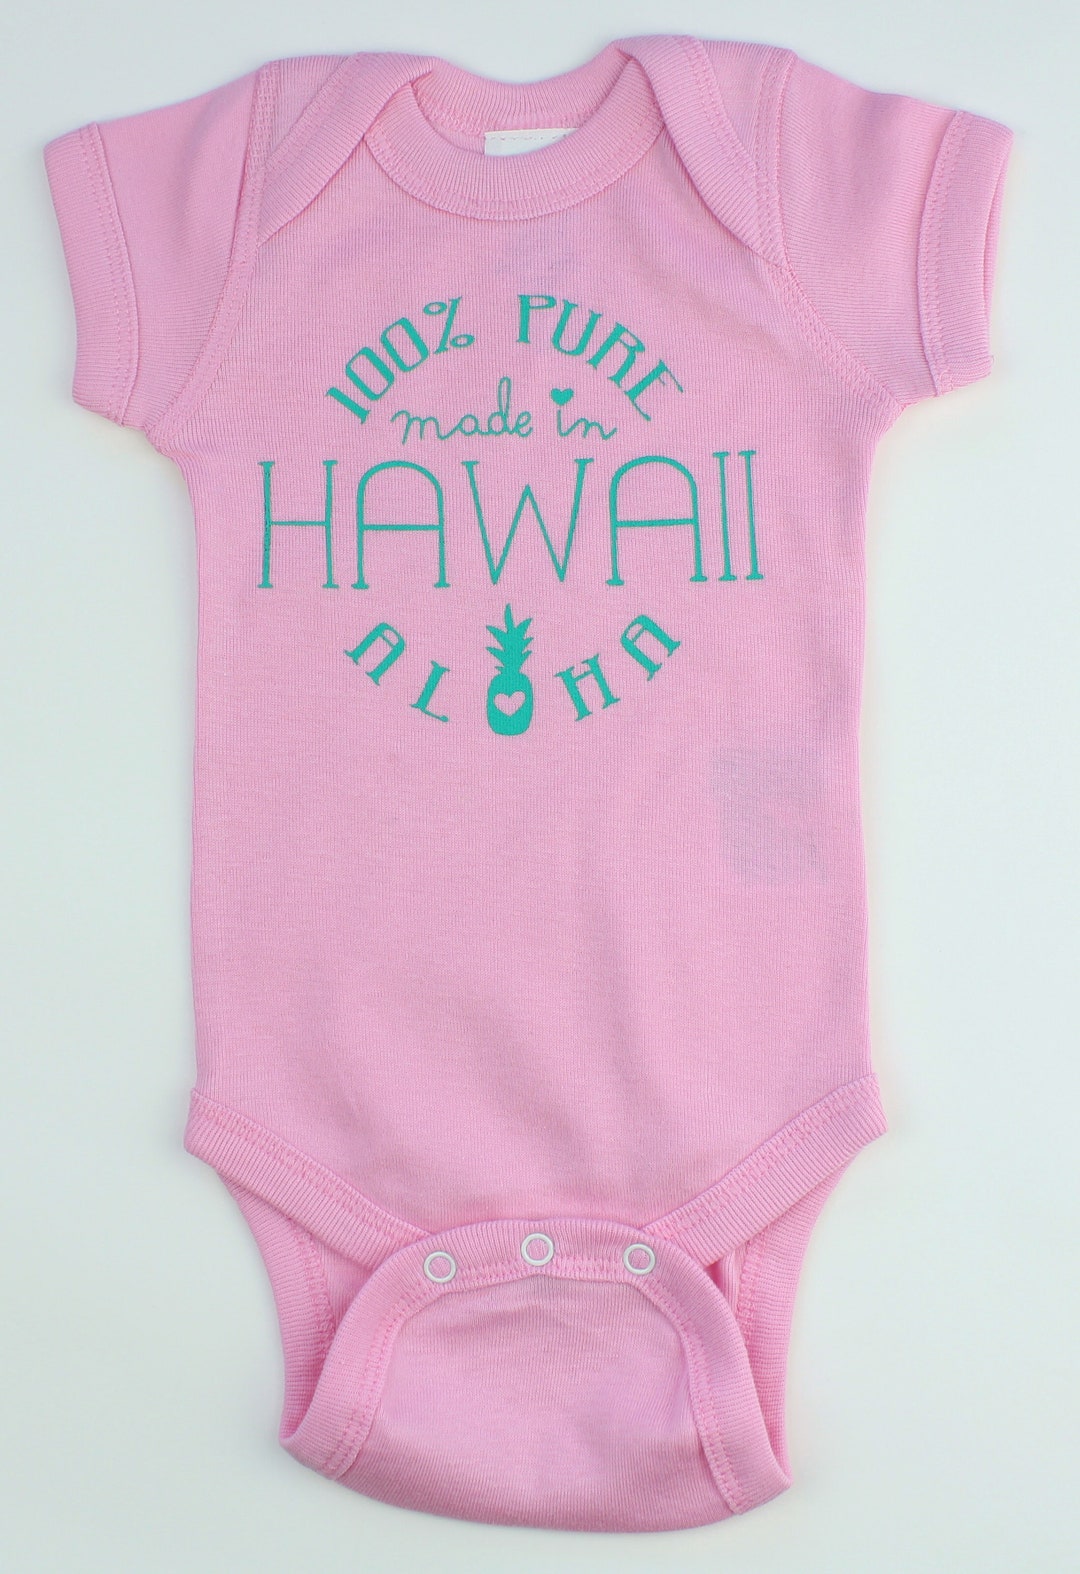 Made in Hawaii Outfit Gender Reveal Hawaiian Baby Gifts - Etsy